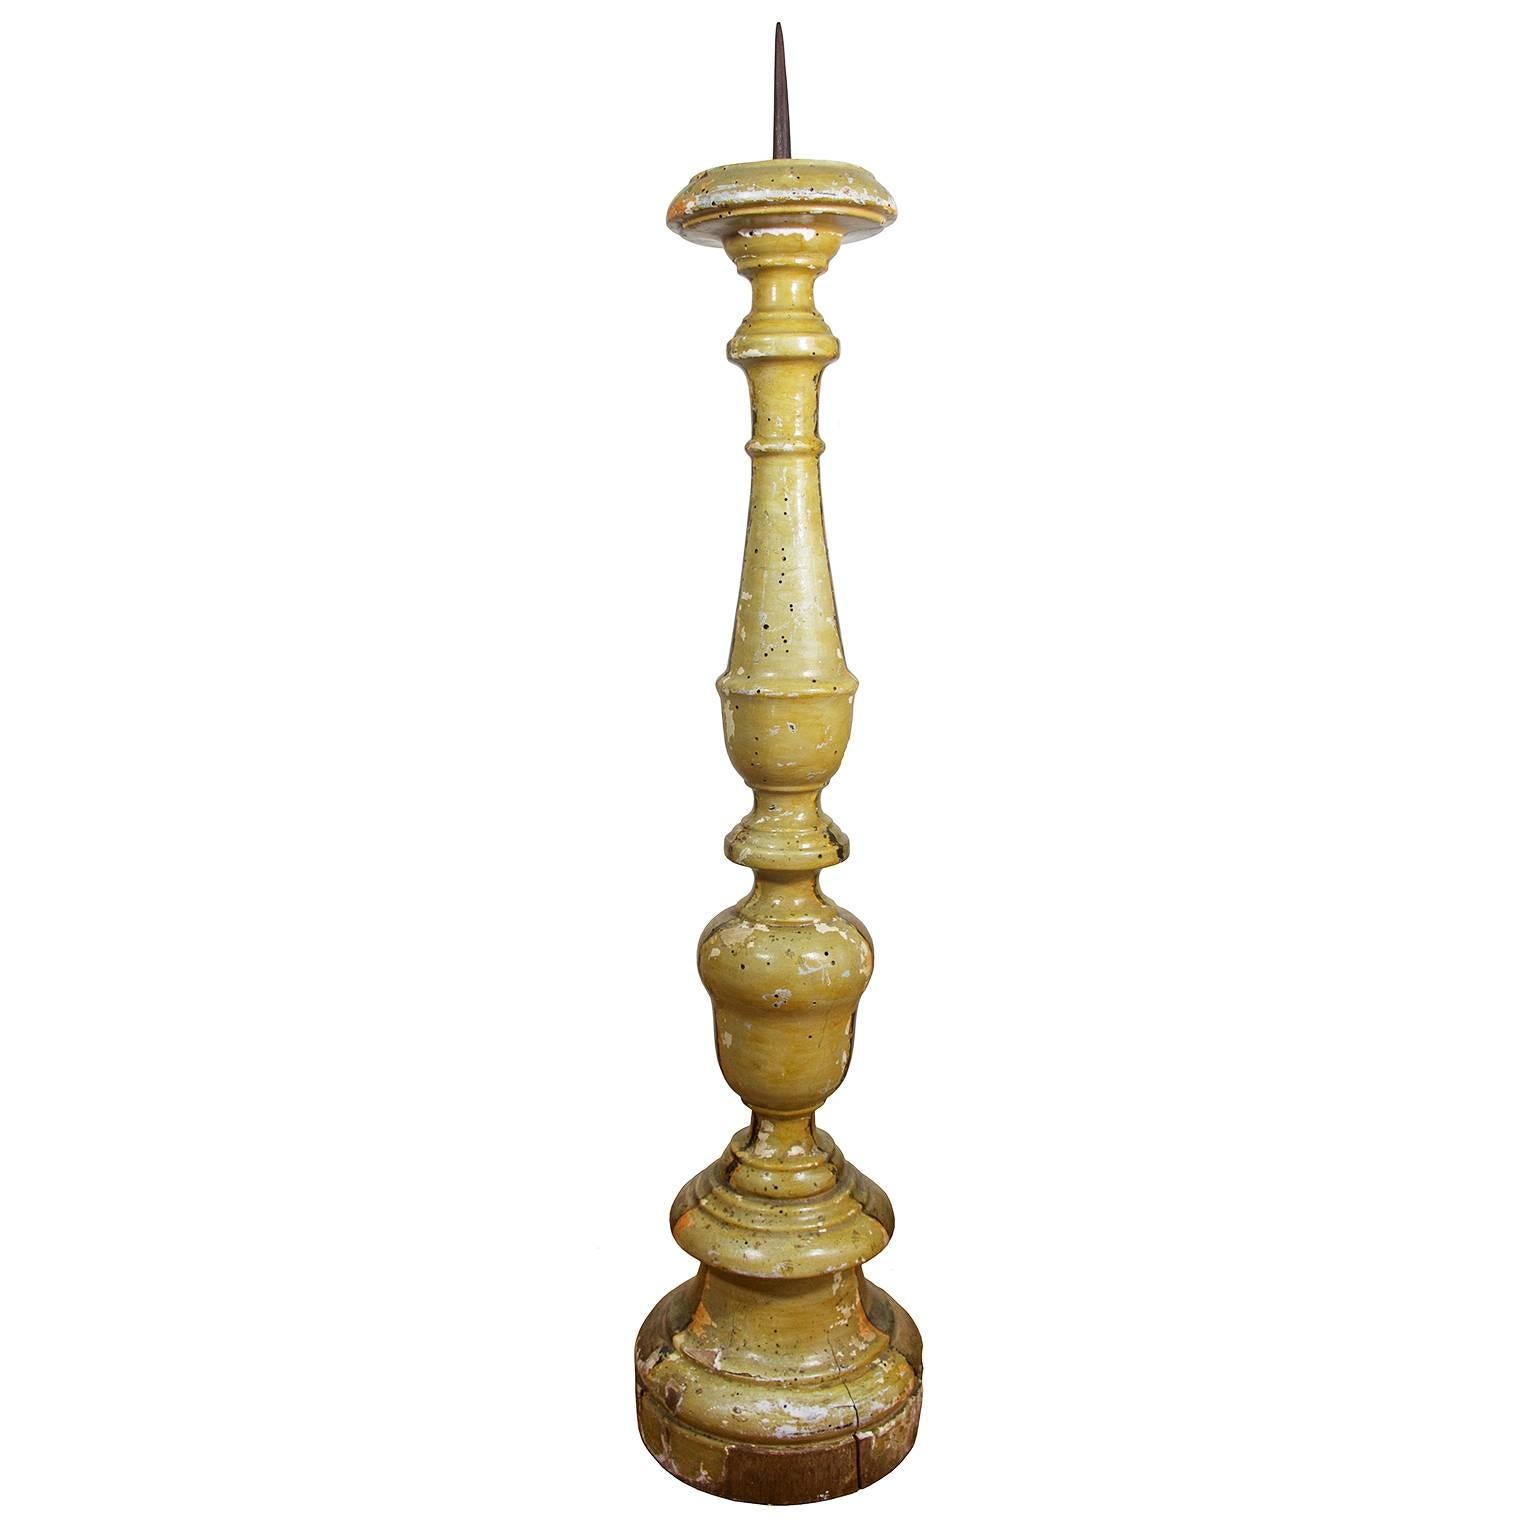 Large antique Italian giltwood floor altar candlestick.
1800s.
Very good original antique condition some losses to surface and paint (please see all photos), old woodworm holes which are typical for antique wood items.

Measurements:
Height